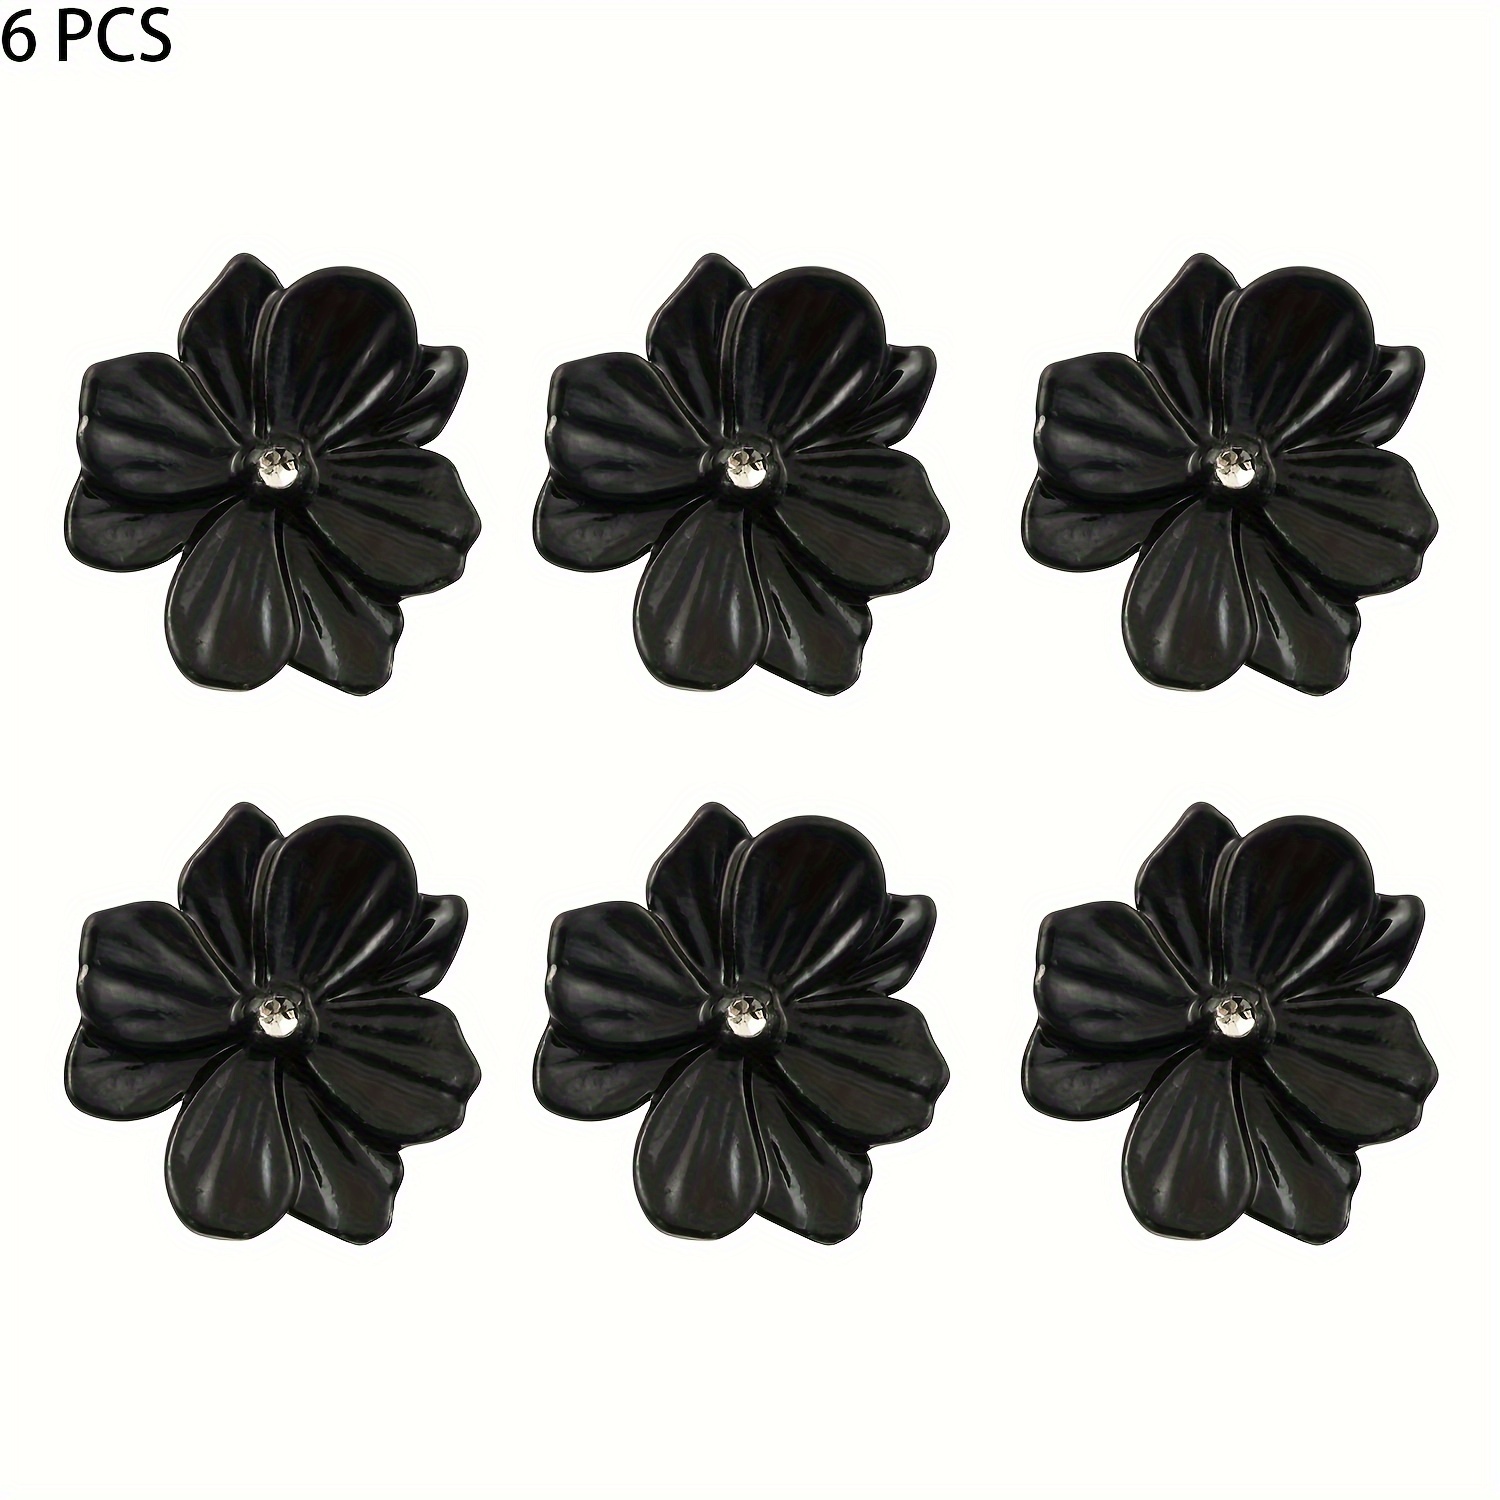 

6pcs Flower Kitchen Cabinet Knobs And Pulls, Vintage Drawer Knobs Handles, Drawer Pulls, Single Hole Farmhouse Knobs For Dresser Drawers